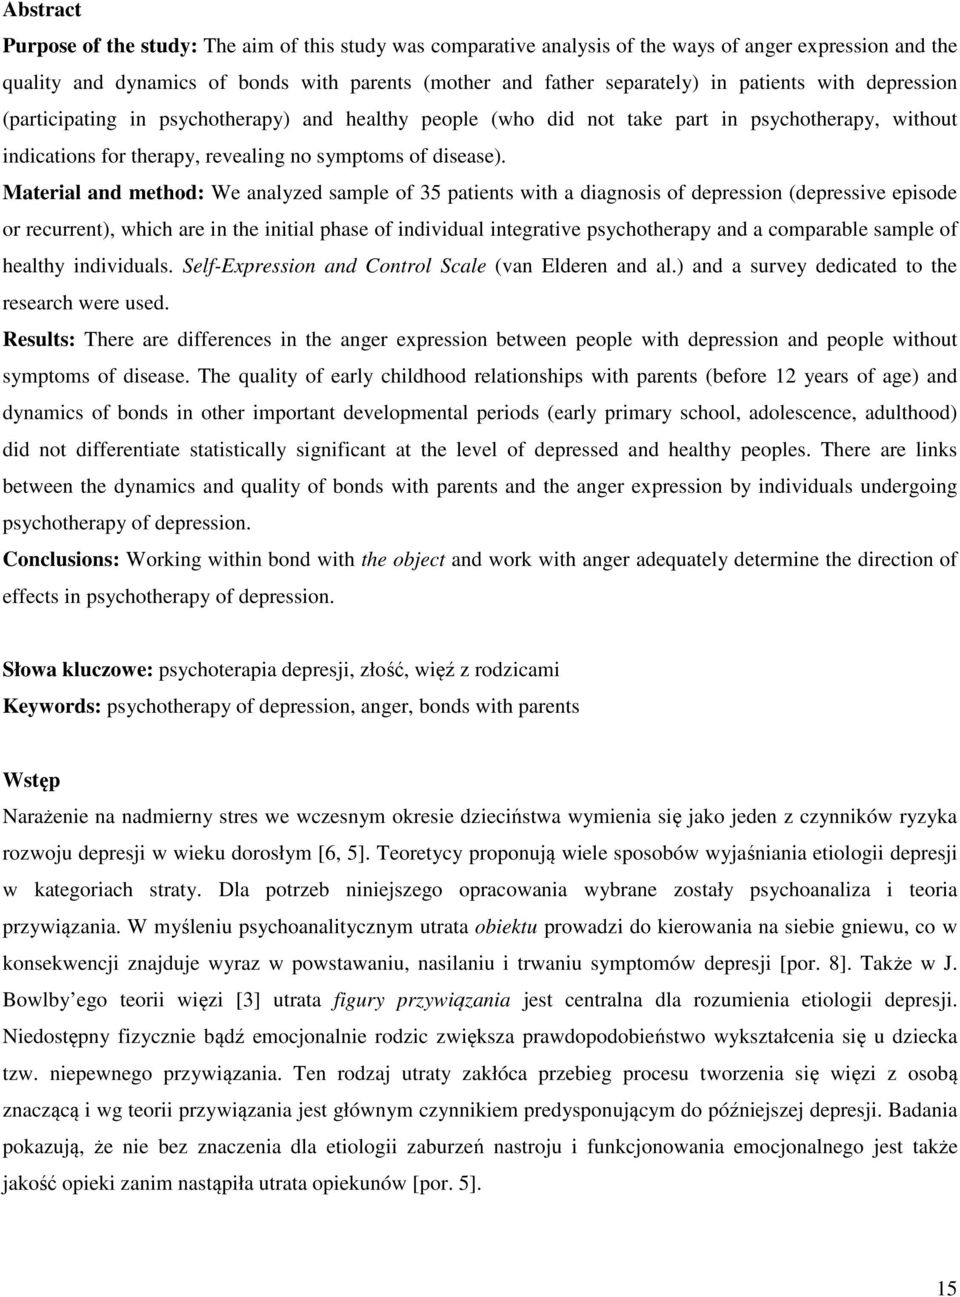 Material and method: We analyzed sample of 35 patients with a diagnosis of depression (depressive episode or recurrent), which are in the initial phase of individual integrative psychotherapy and a